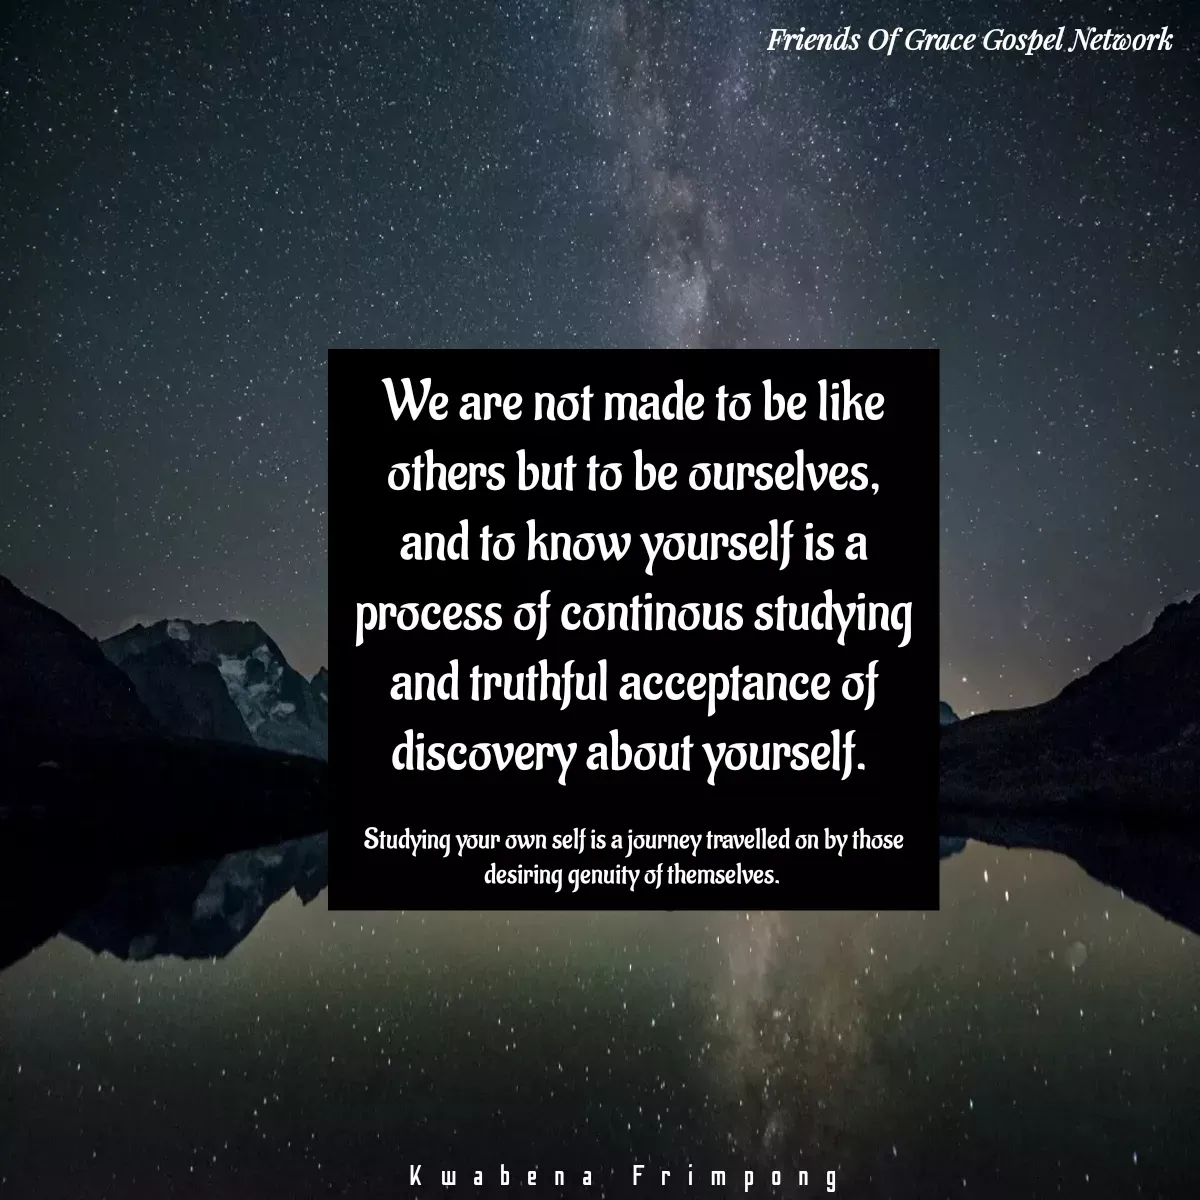 Quote by Afia Asor - We are not made to be like others but to be ourselves, and to know yourself is a process of continous studying and truthful acceptance of discovery about yourself. 

Studying your own self is a journey travelled on by those desiring genuity of themselves. 

Kwabena Frimpong  - Made using Quotes Creator App, Post Maker App